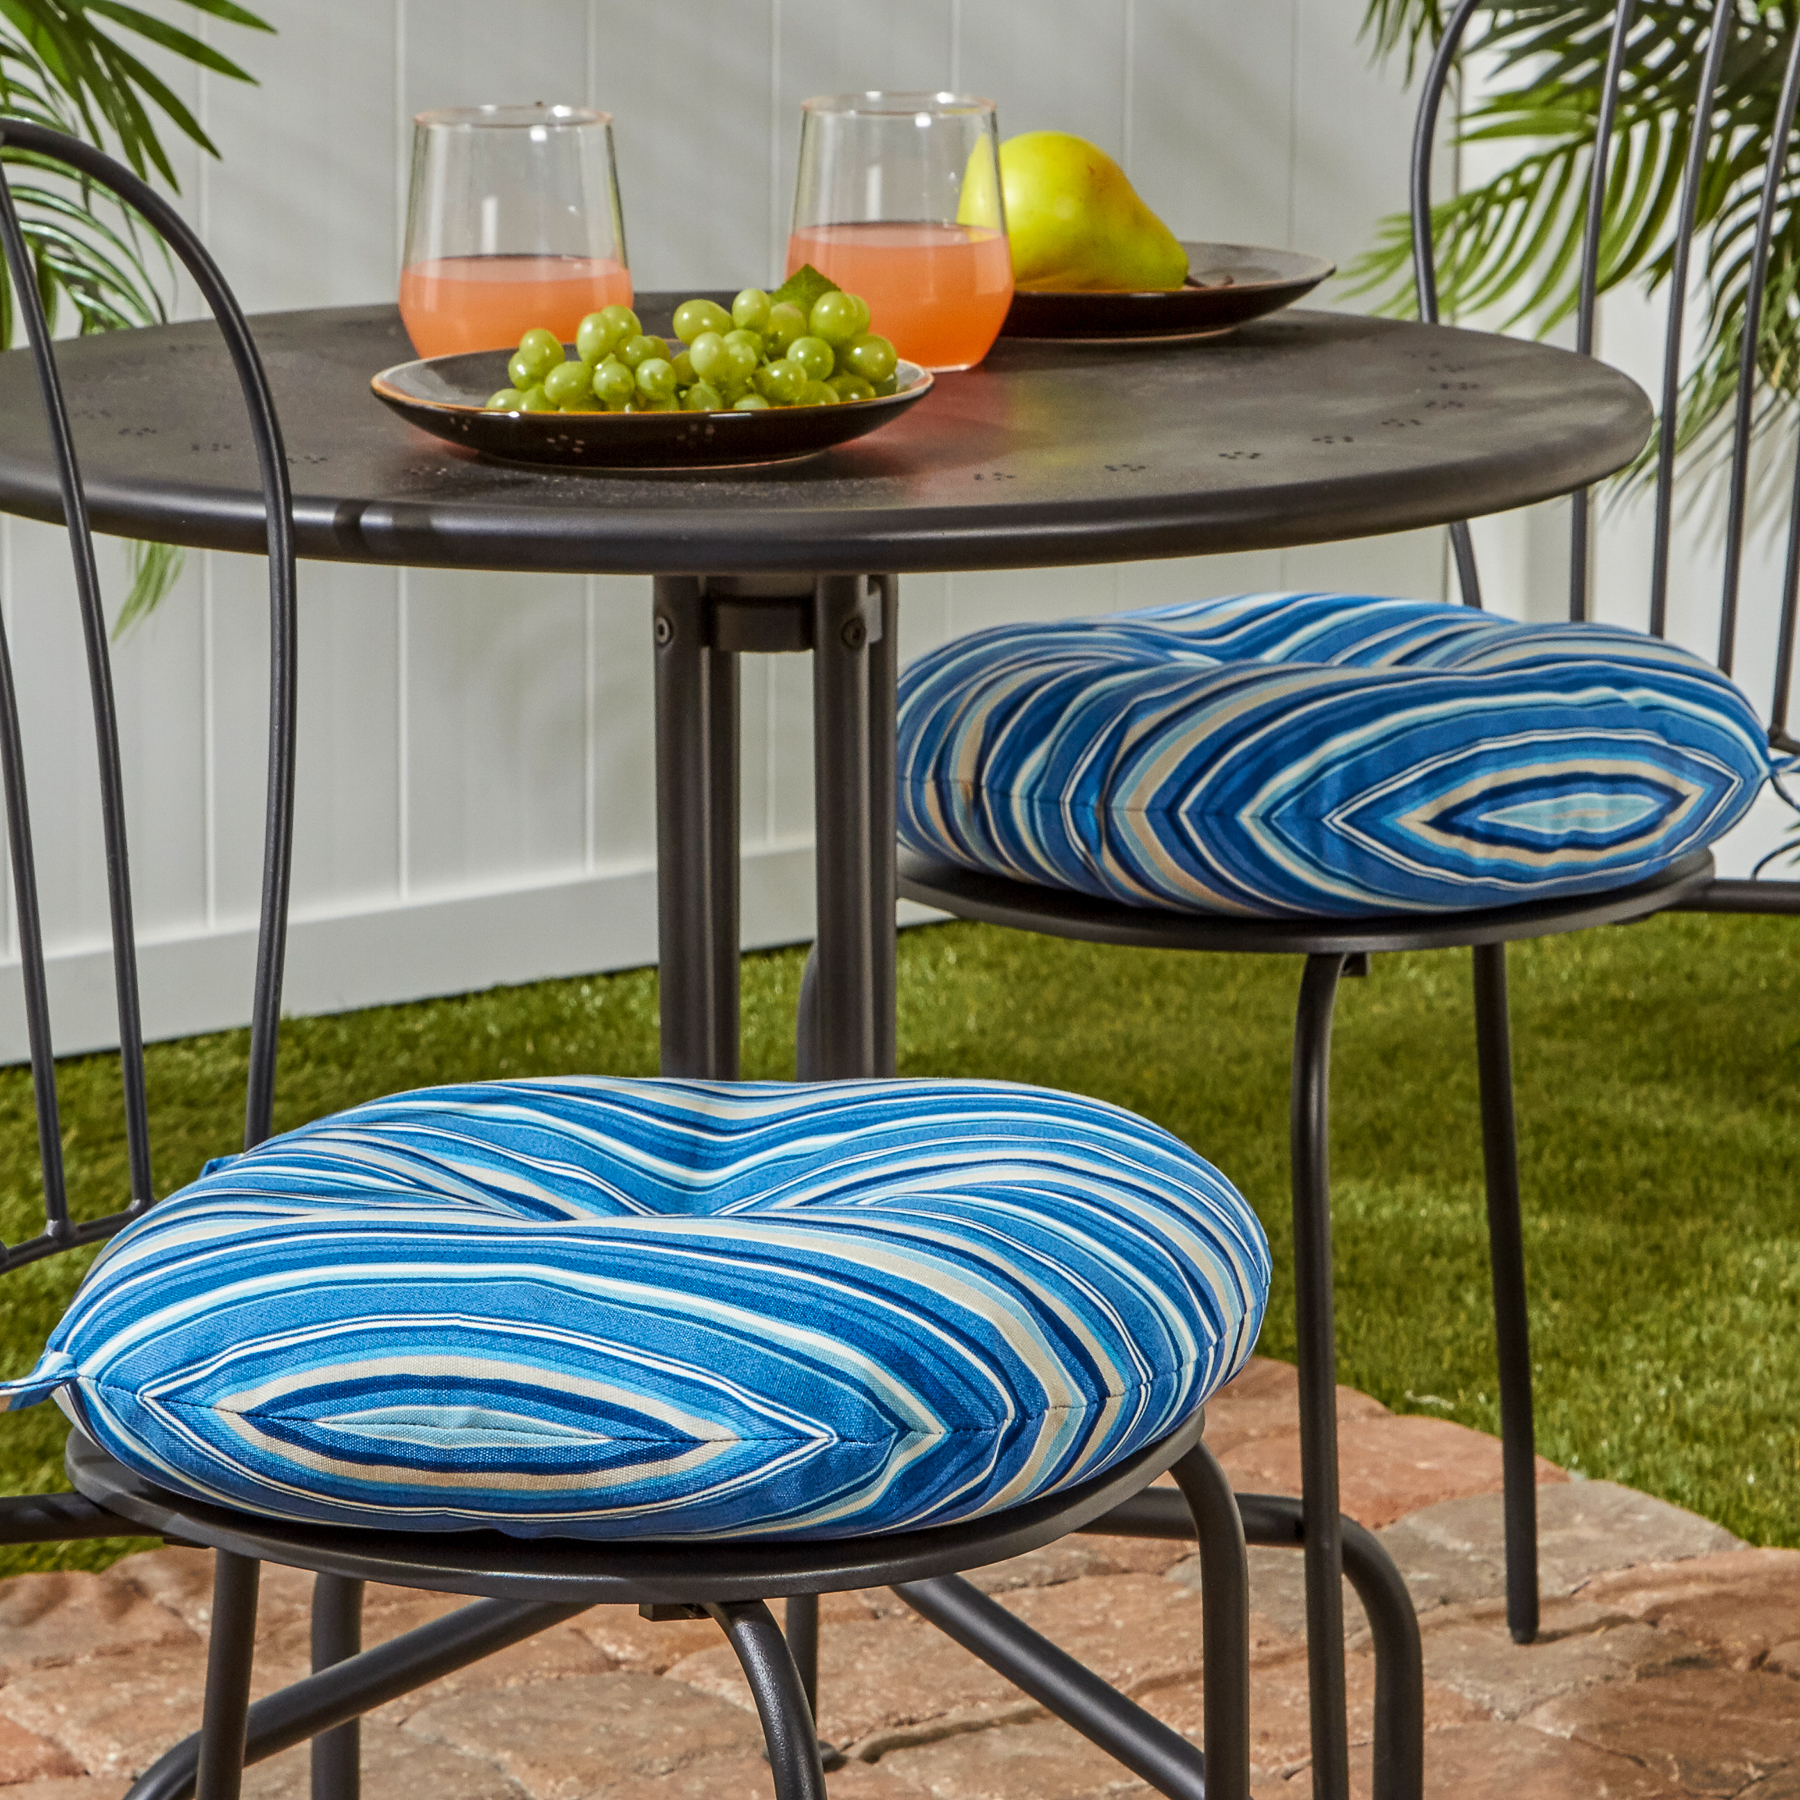 Greendale Home Fashions Sapphire Stripe 15 in. Round Outdoor Reversible Bistro Seat Cushion (Set of 2) - image 3 of 6